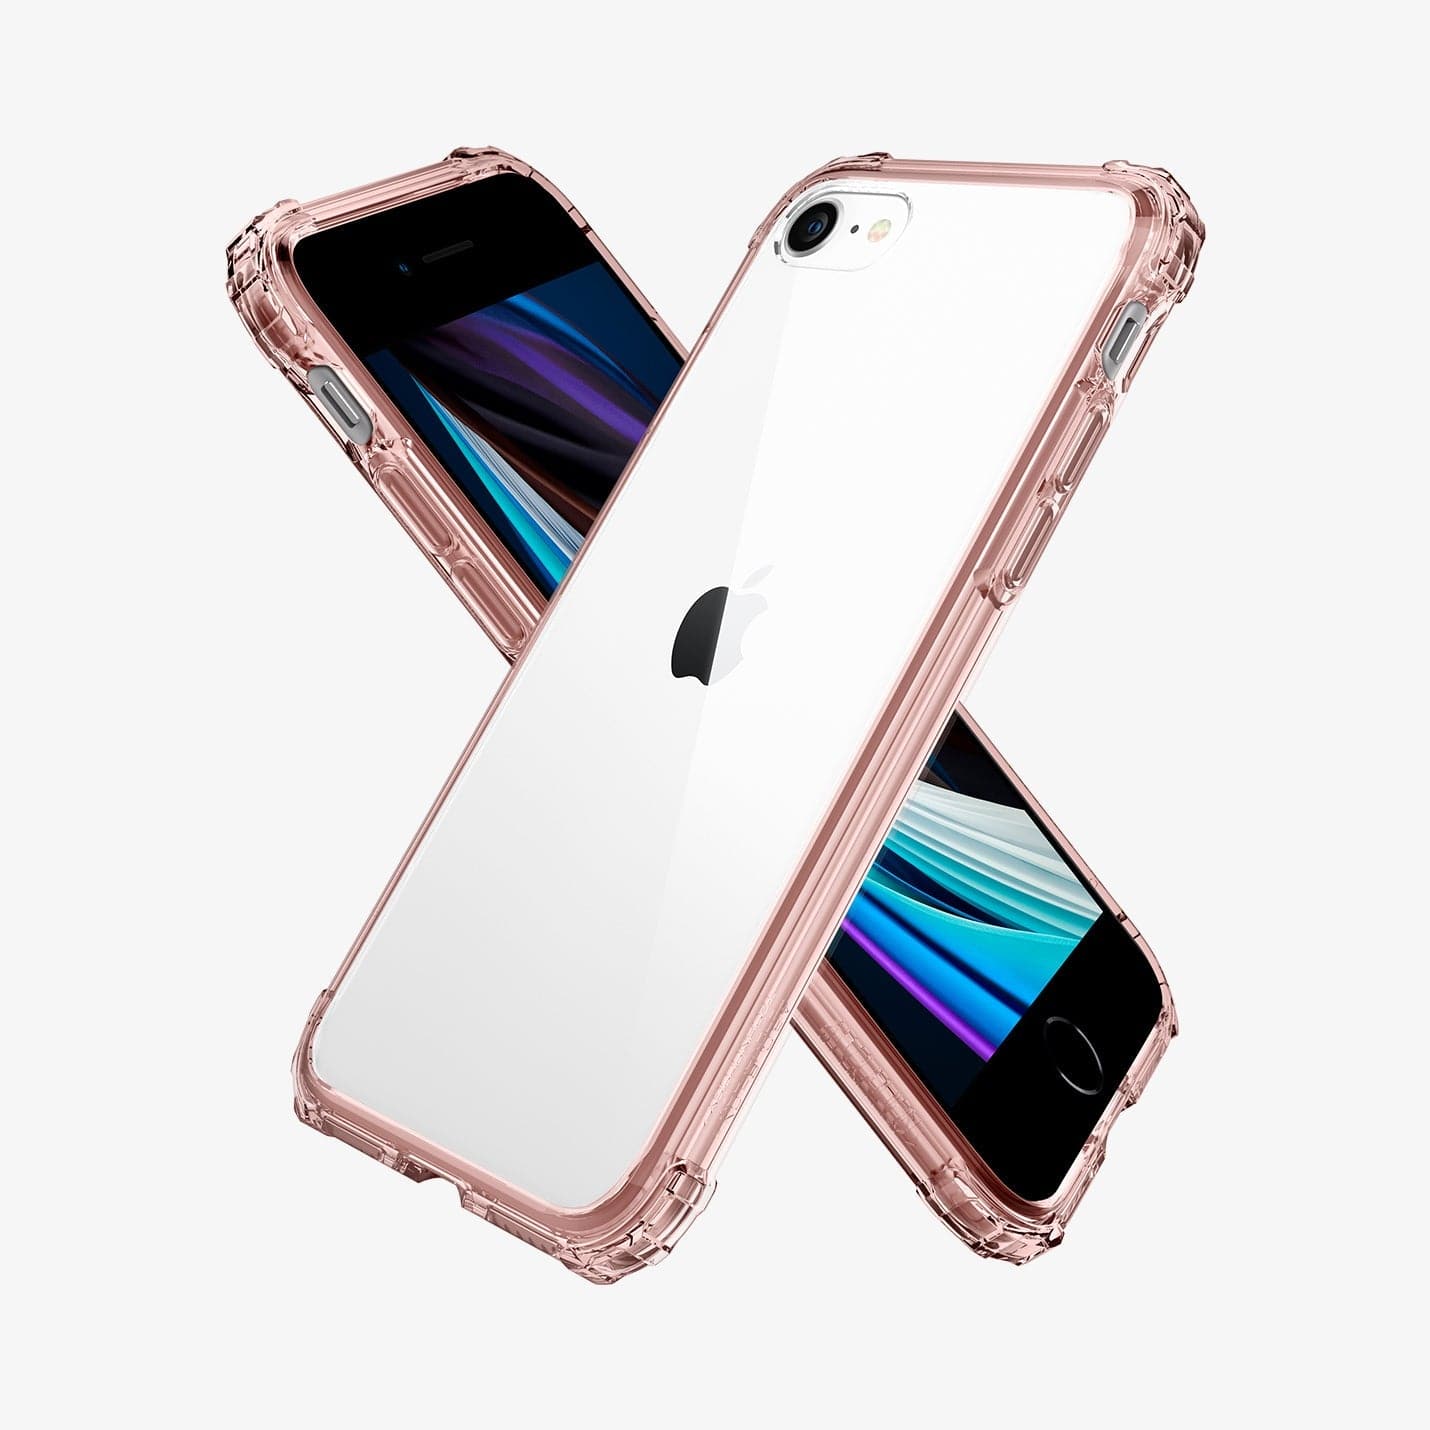 042CS20308 - iPhone 8 Case Crystal Shell in rose crystal showing the back, front and sides